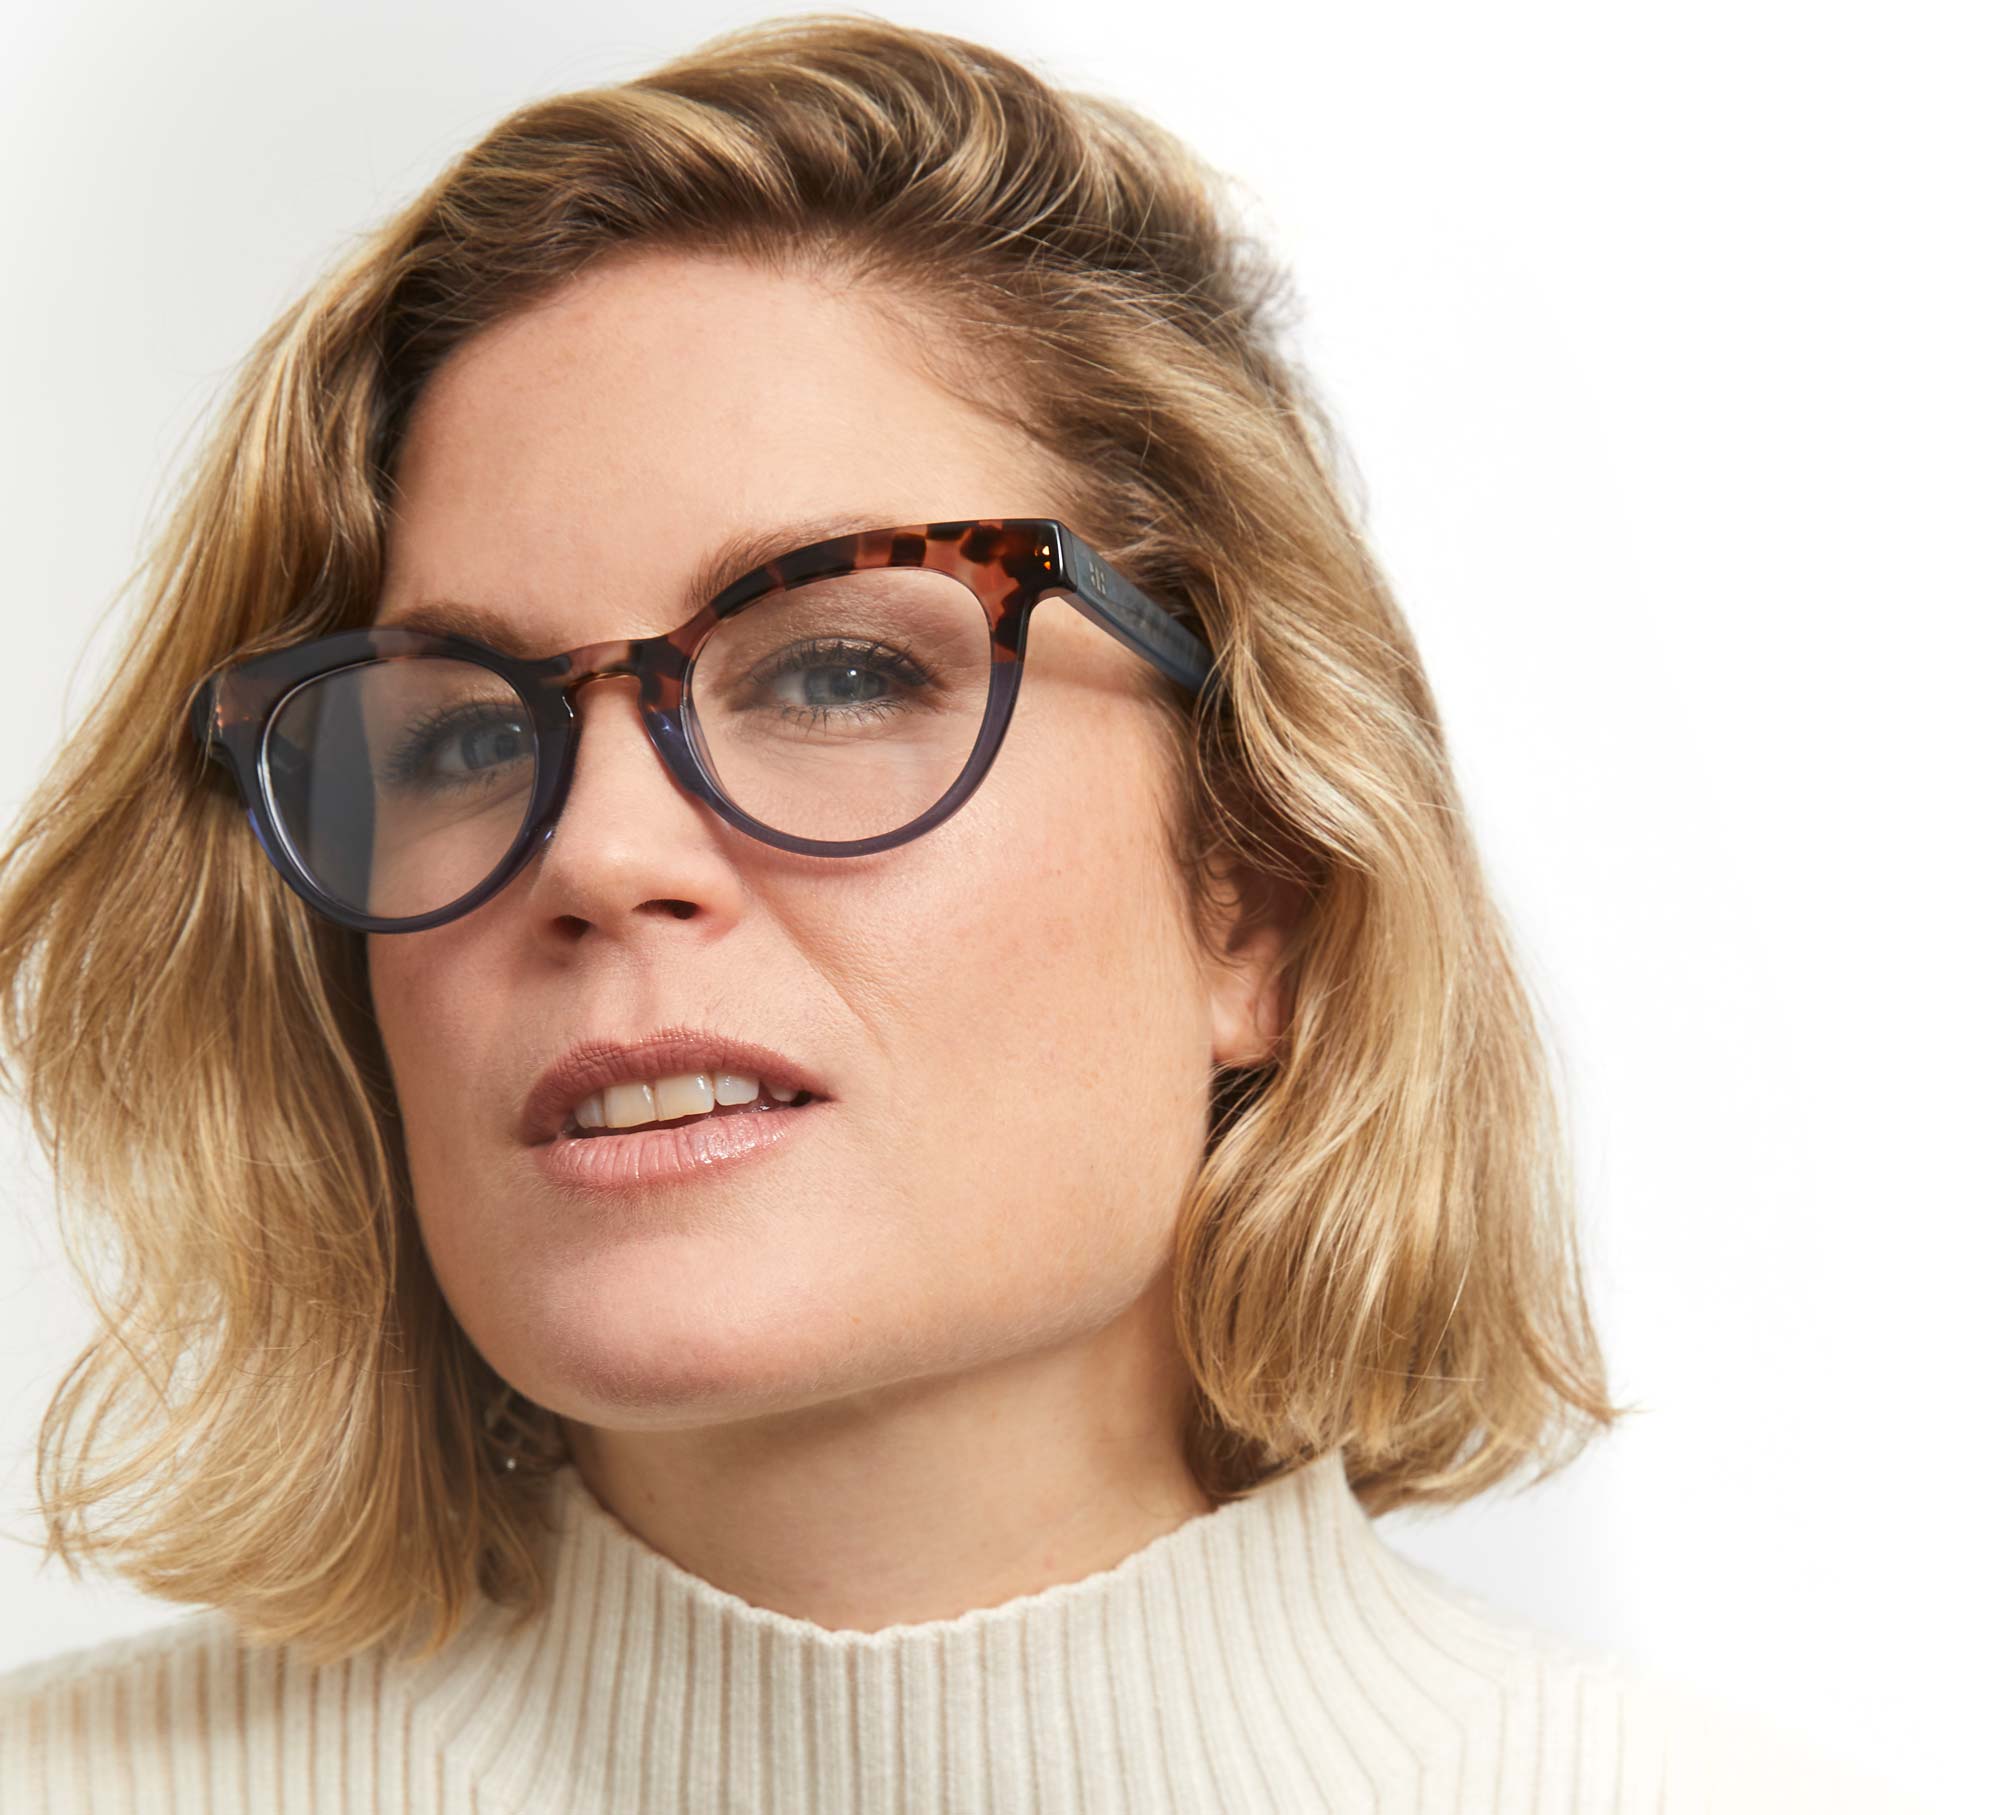 Photo of a man or woman wearing Céline Orange & Tortoise Reading Glasses by French Kiwis